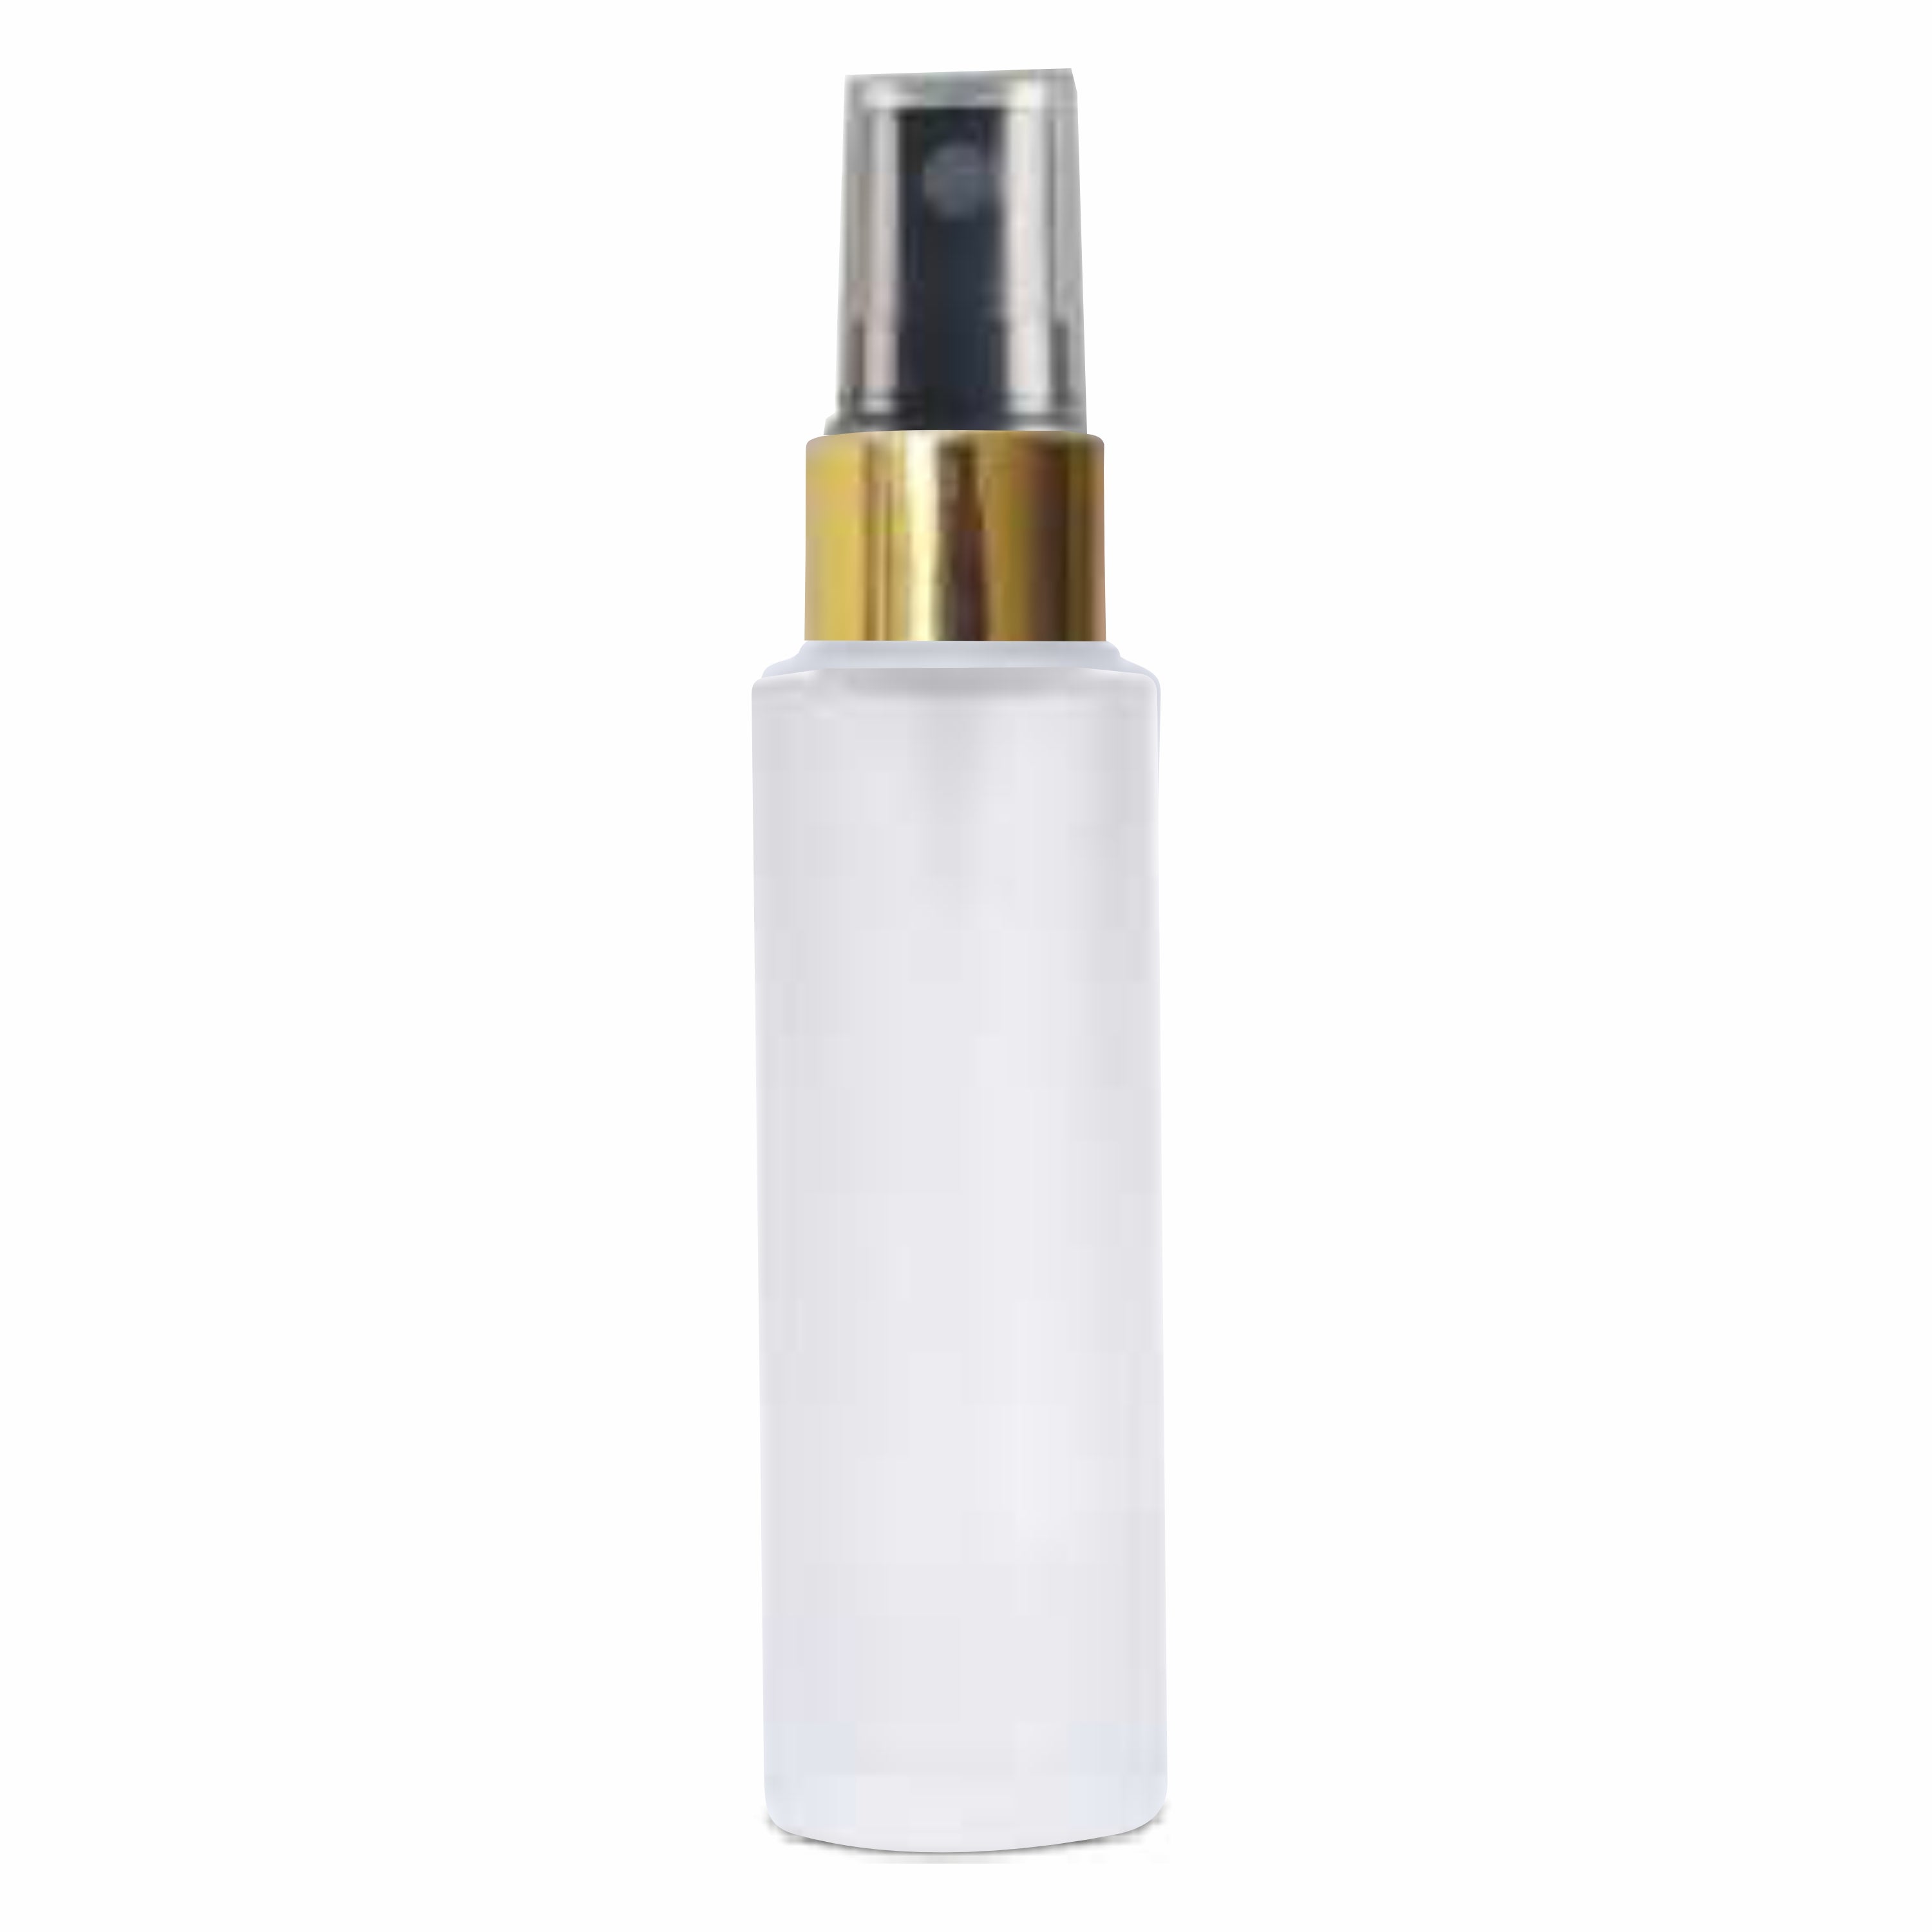 Frosted Glass Bottle With Golden Plated Black Mist Spray Pump 25ml, 30ml, 50ml, 100ml  [ZMG46]